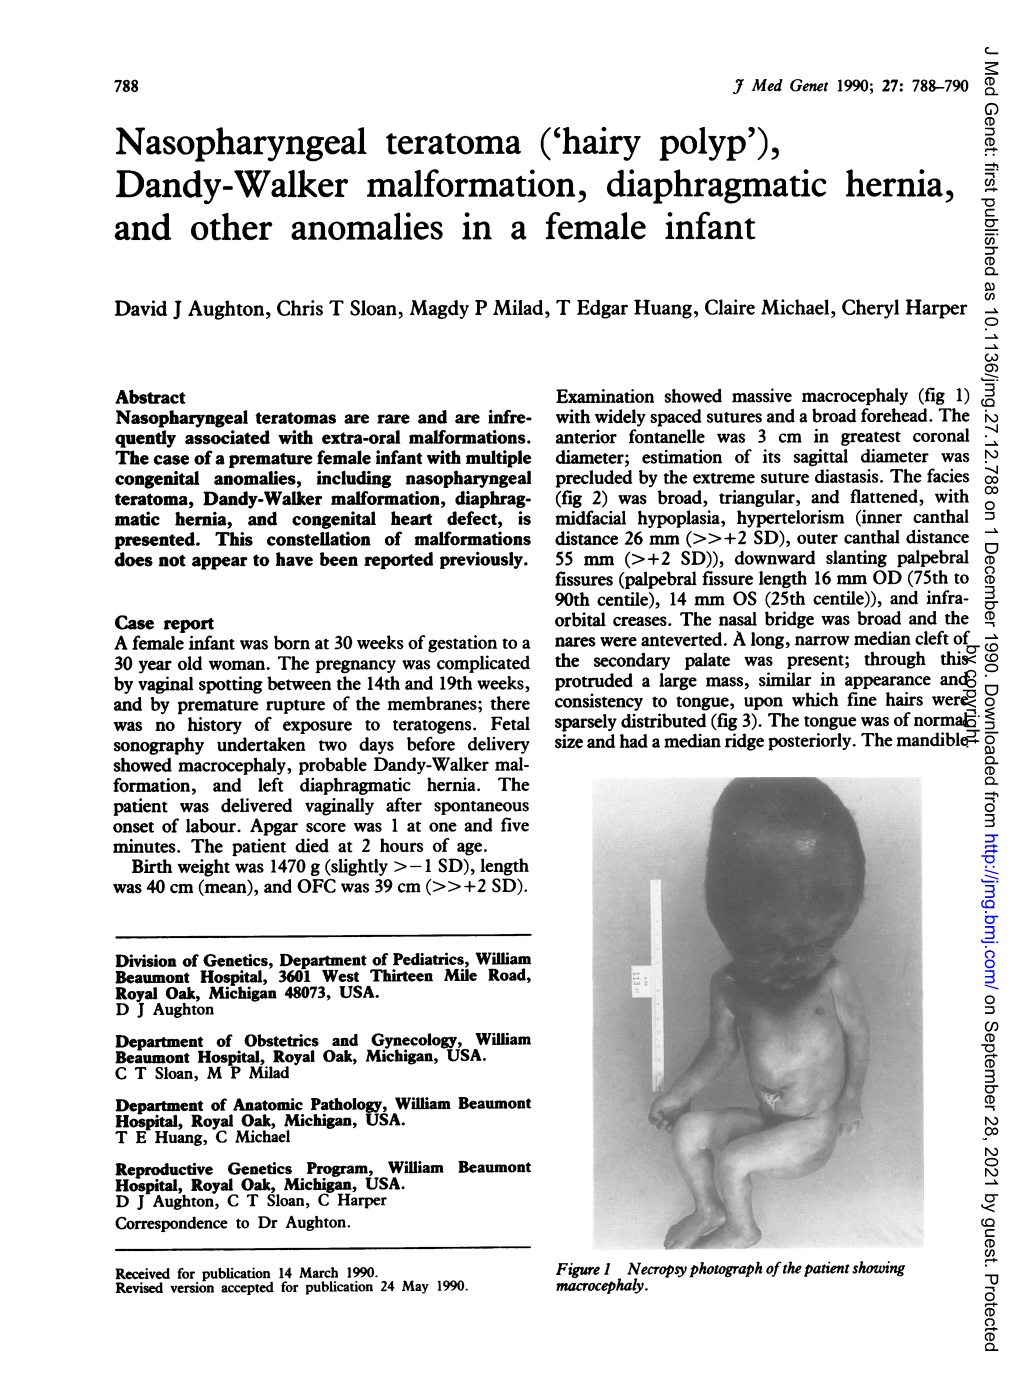 Nasopharyngeal Teratoma ('Hairy Polyp'), Dandy-Walker Malformation, Diaphragmatic Hernia, and Other Anomalies in a Female Infant